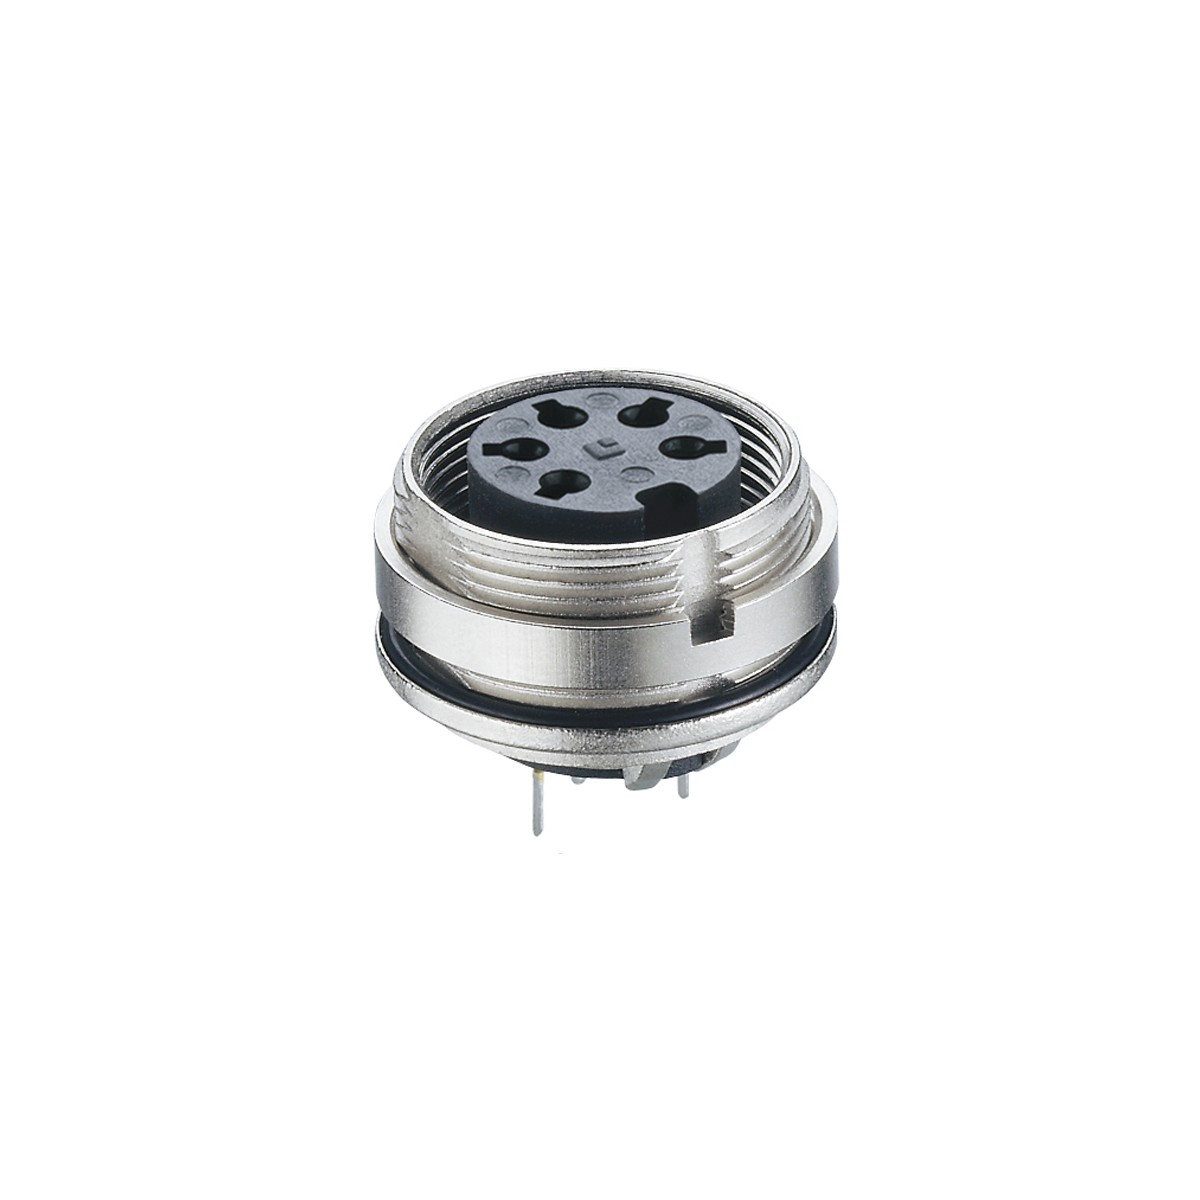 Lumberg: 307 (Series 03 | Circular connectors with threaded joint M16 acc. to IEC 61076-2-106, IP40/IP68)